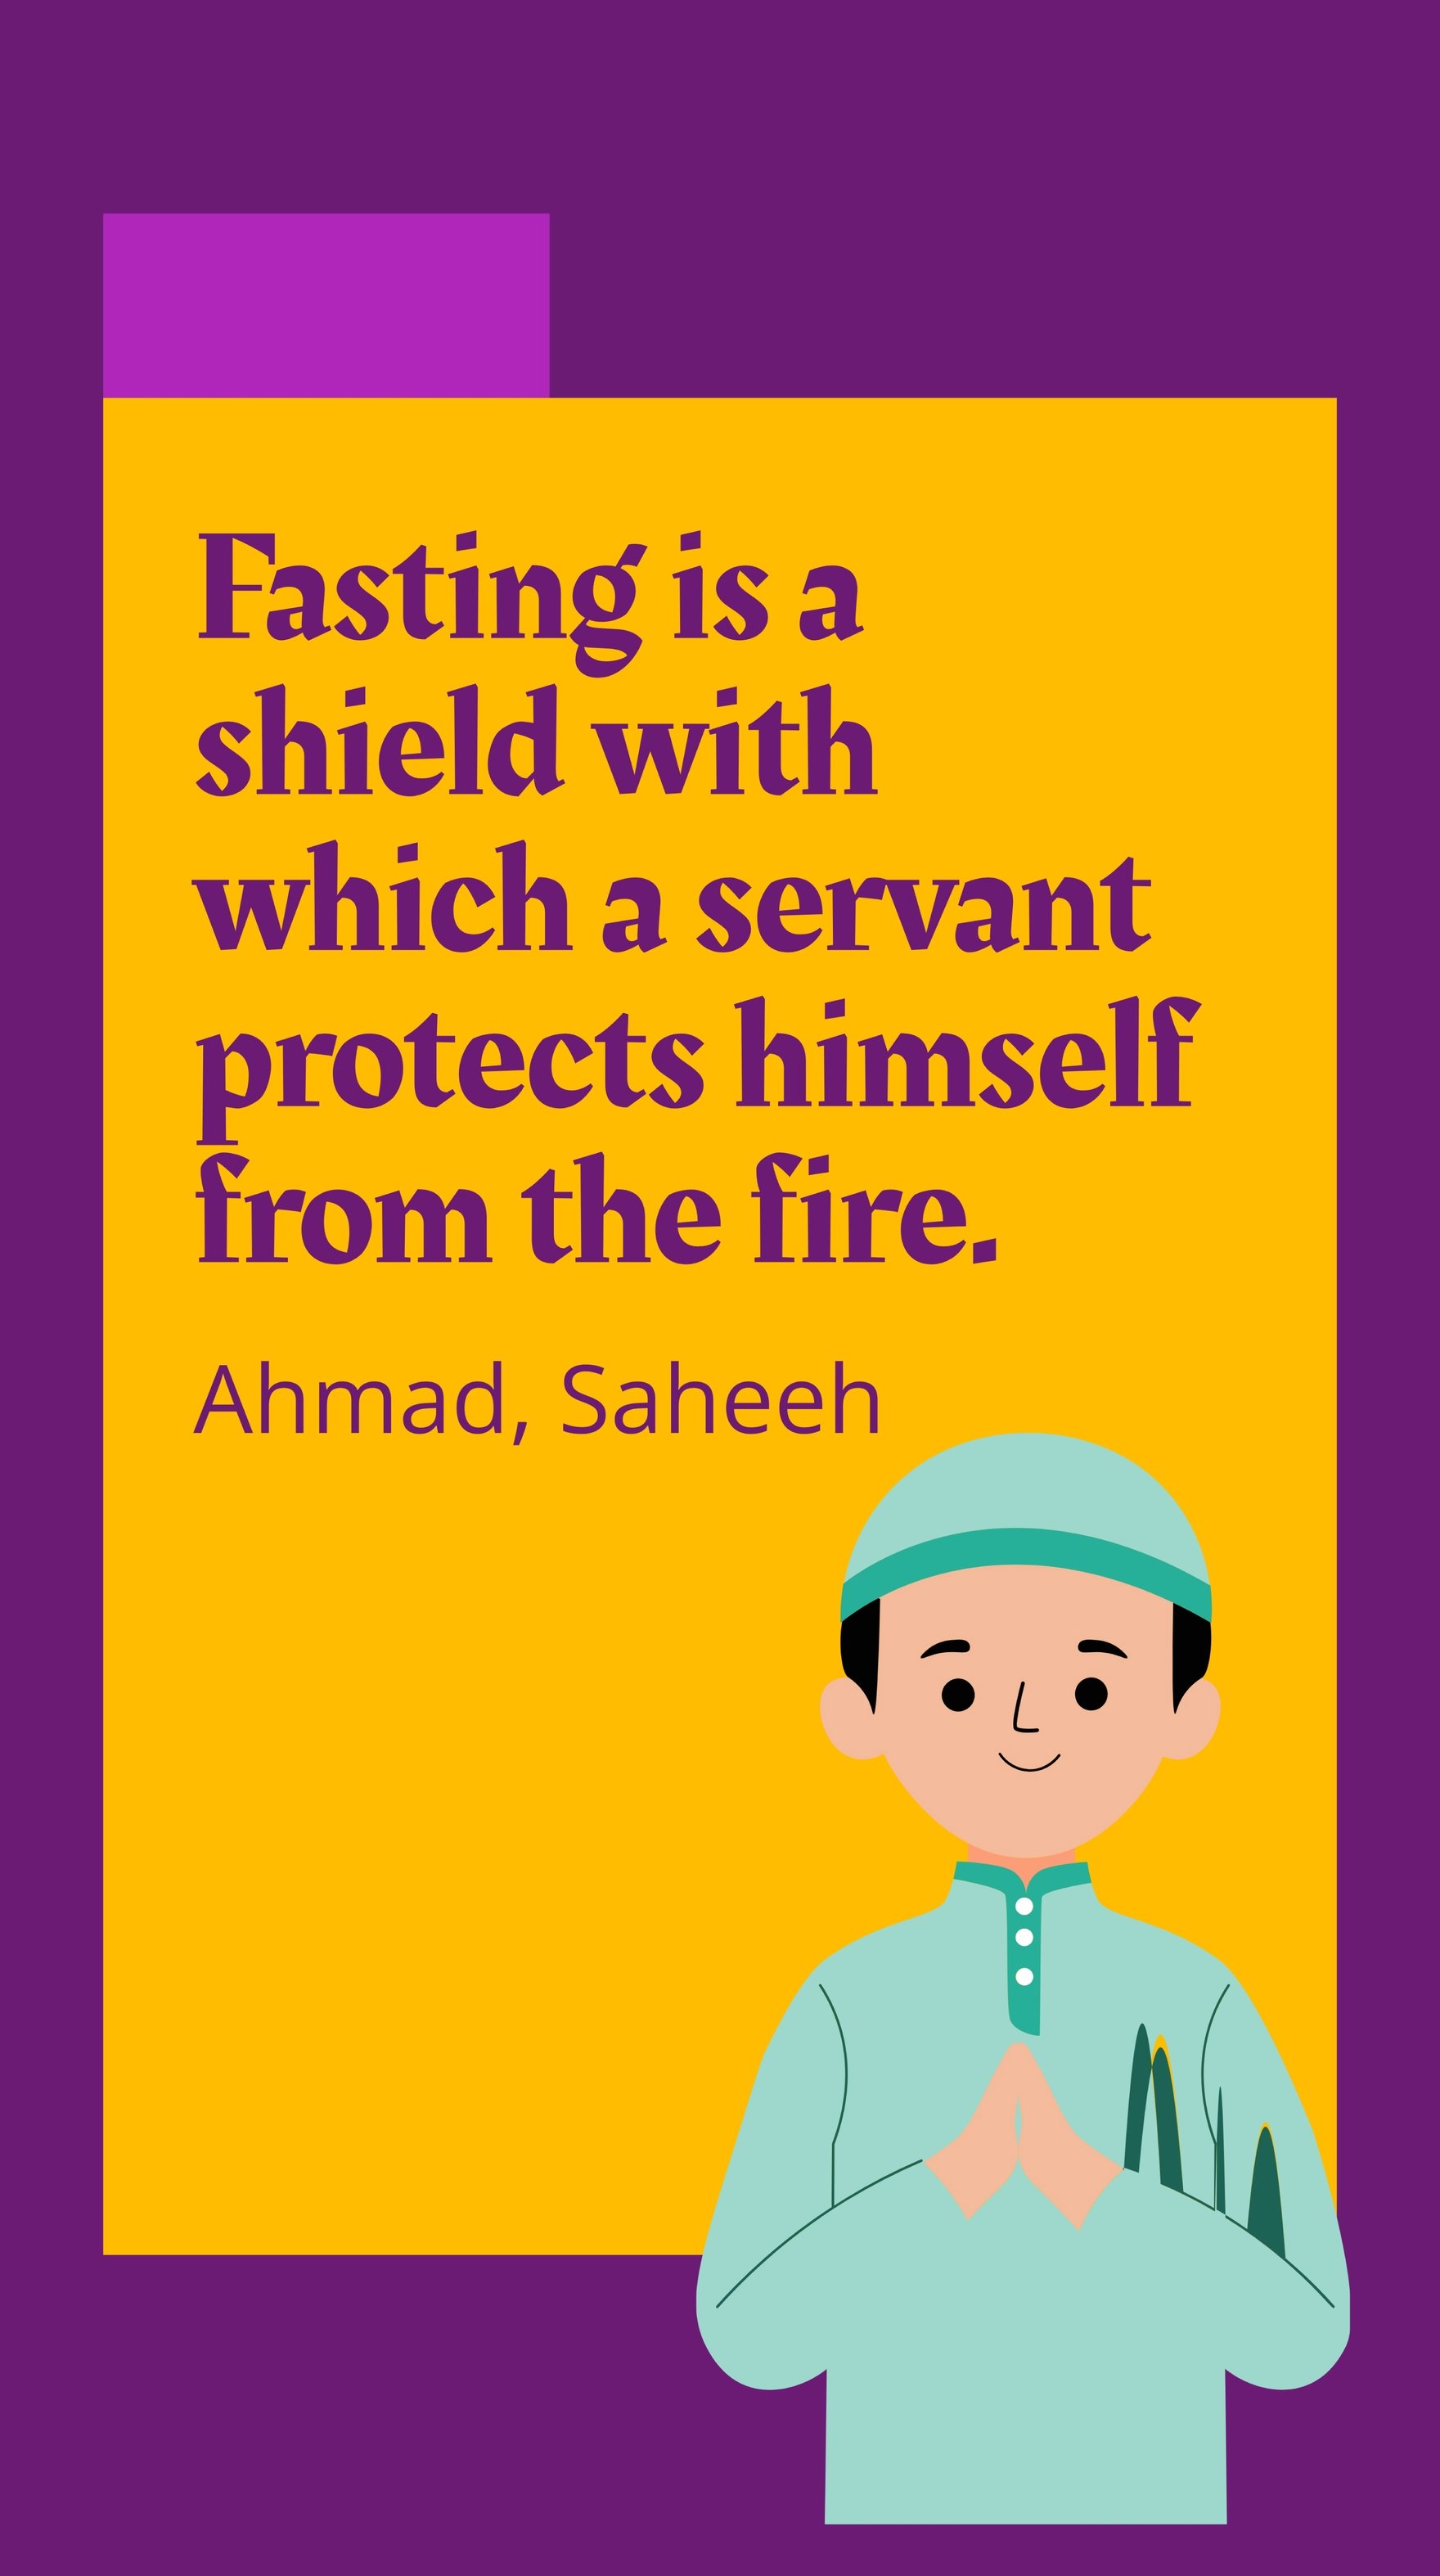 Free Ahmad, Saheeh - Fasting is a shield with which a servant protects himself from the fire. in JPG